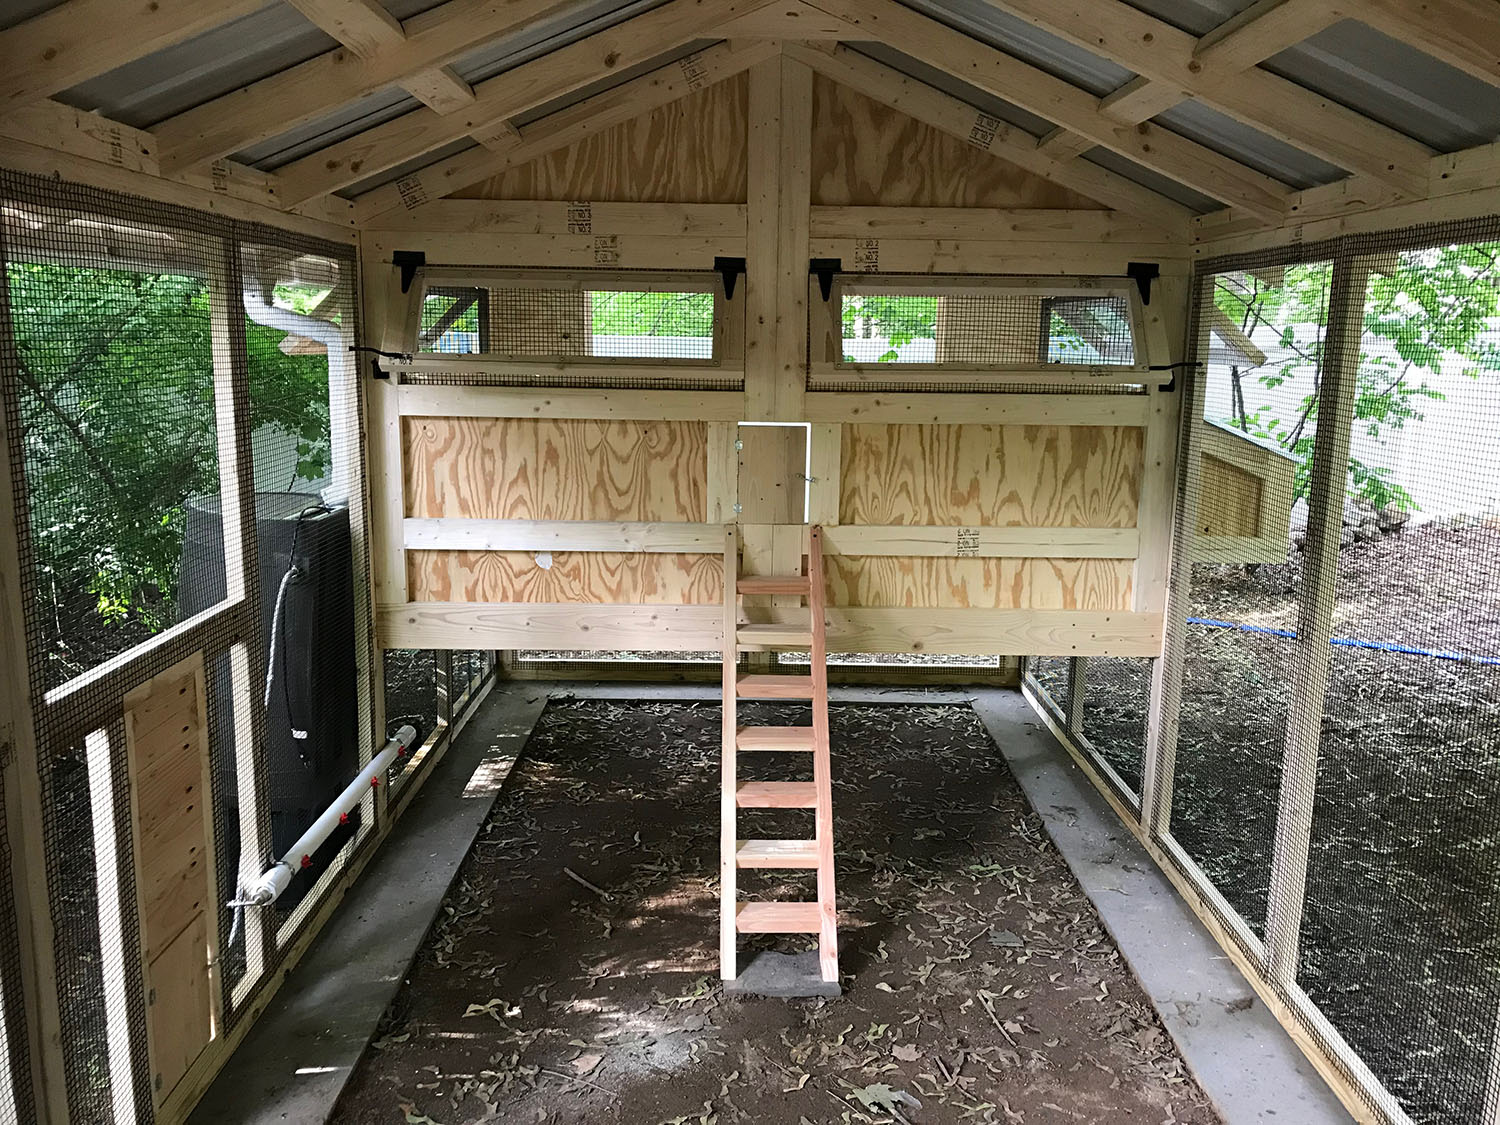 inside the run of an 8×18 American Coop with a poultry water system and free range door